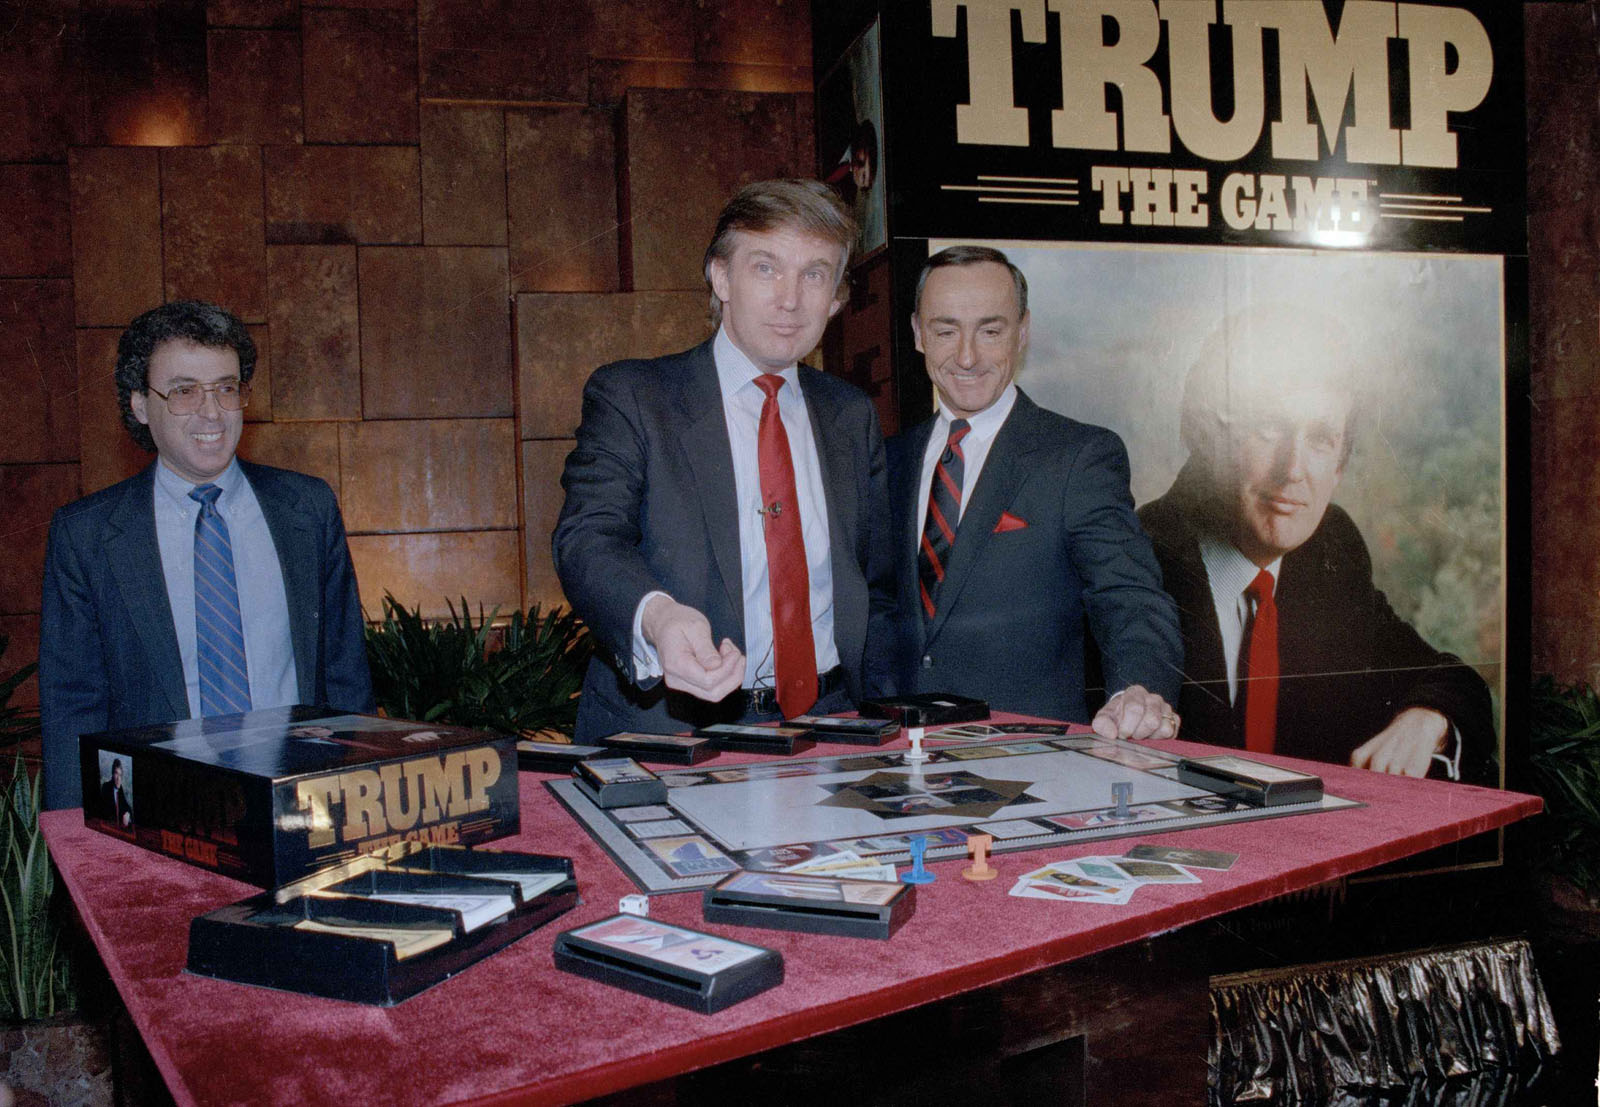 Real estate mogul Donald Trump, left, takes his turn as George Ditomassi, president of the Milton Bradley company, looks on at a news conference in New York, announcing a new board game, "Trump, The Game," Feb. 7, 1989. The game allows players to bid against each other and make deals for big ticket real estate. Man at far left is unidentified. (AP Photo/Mario Suriani)